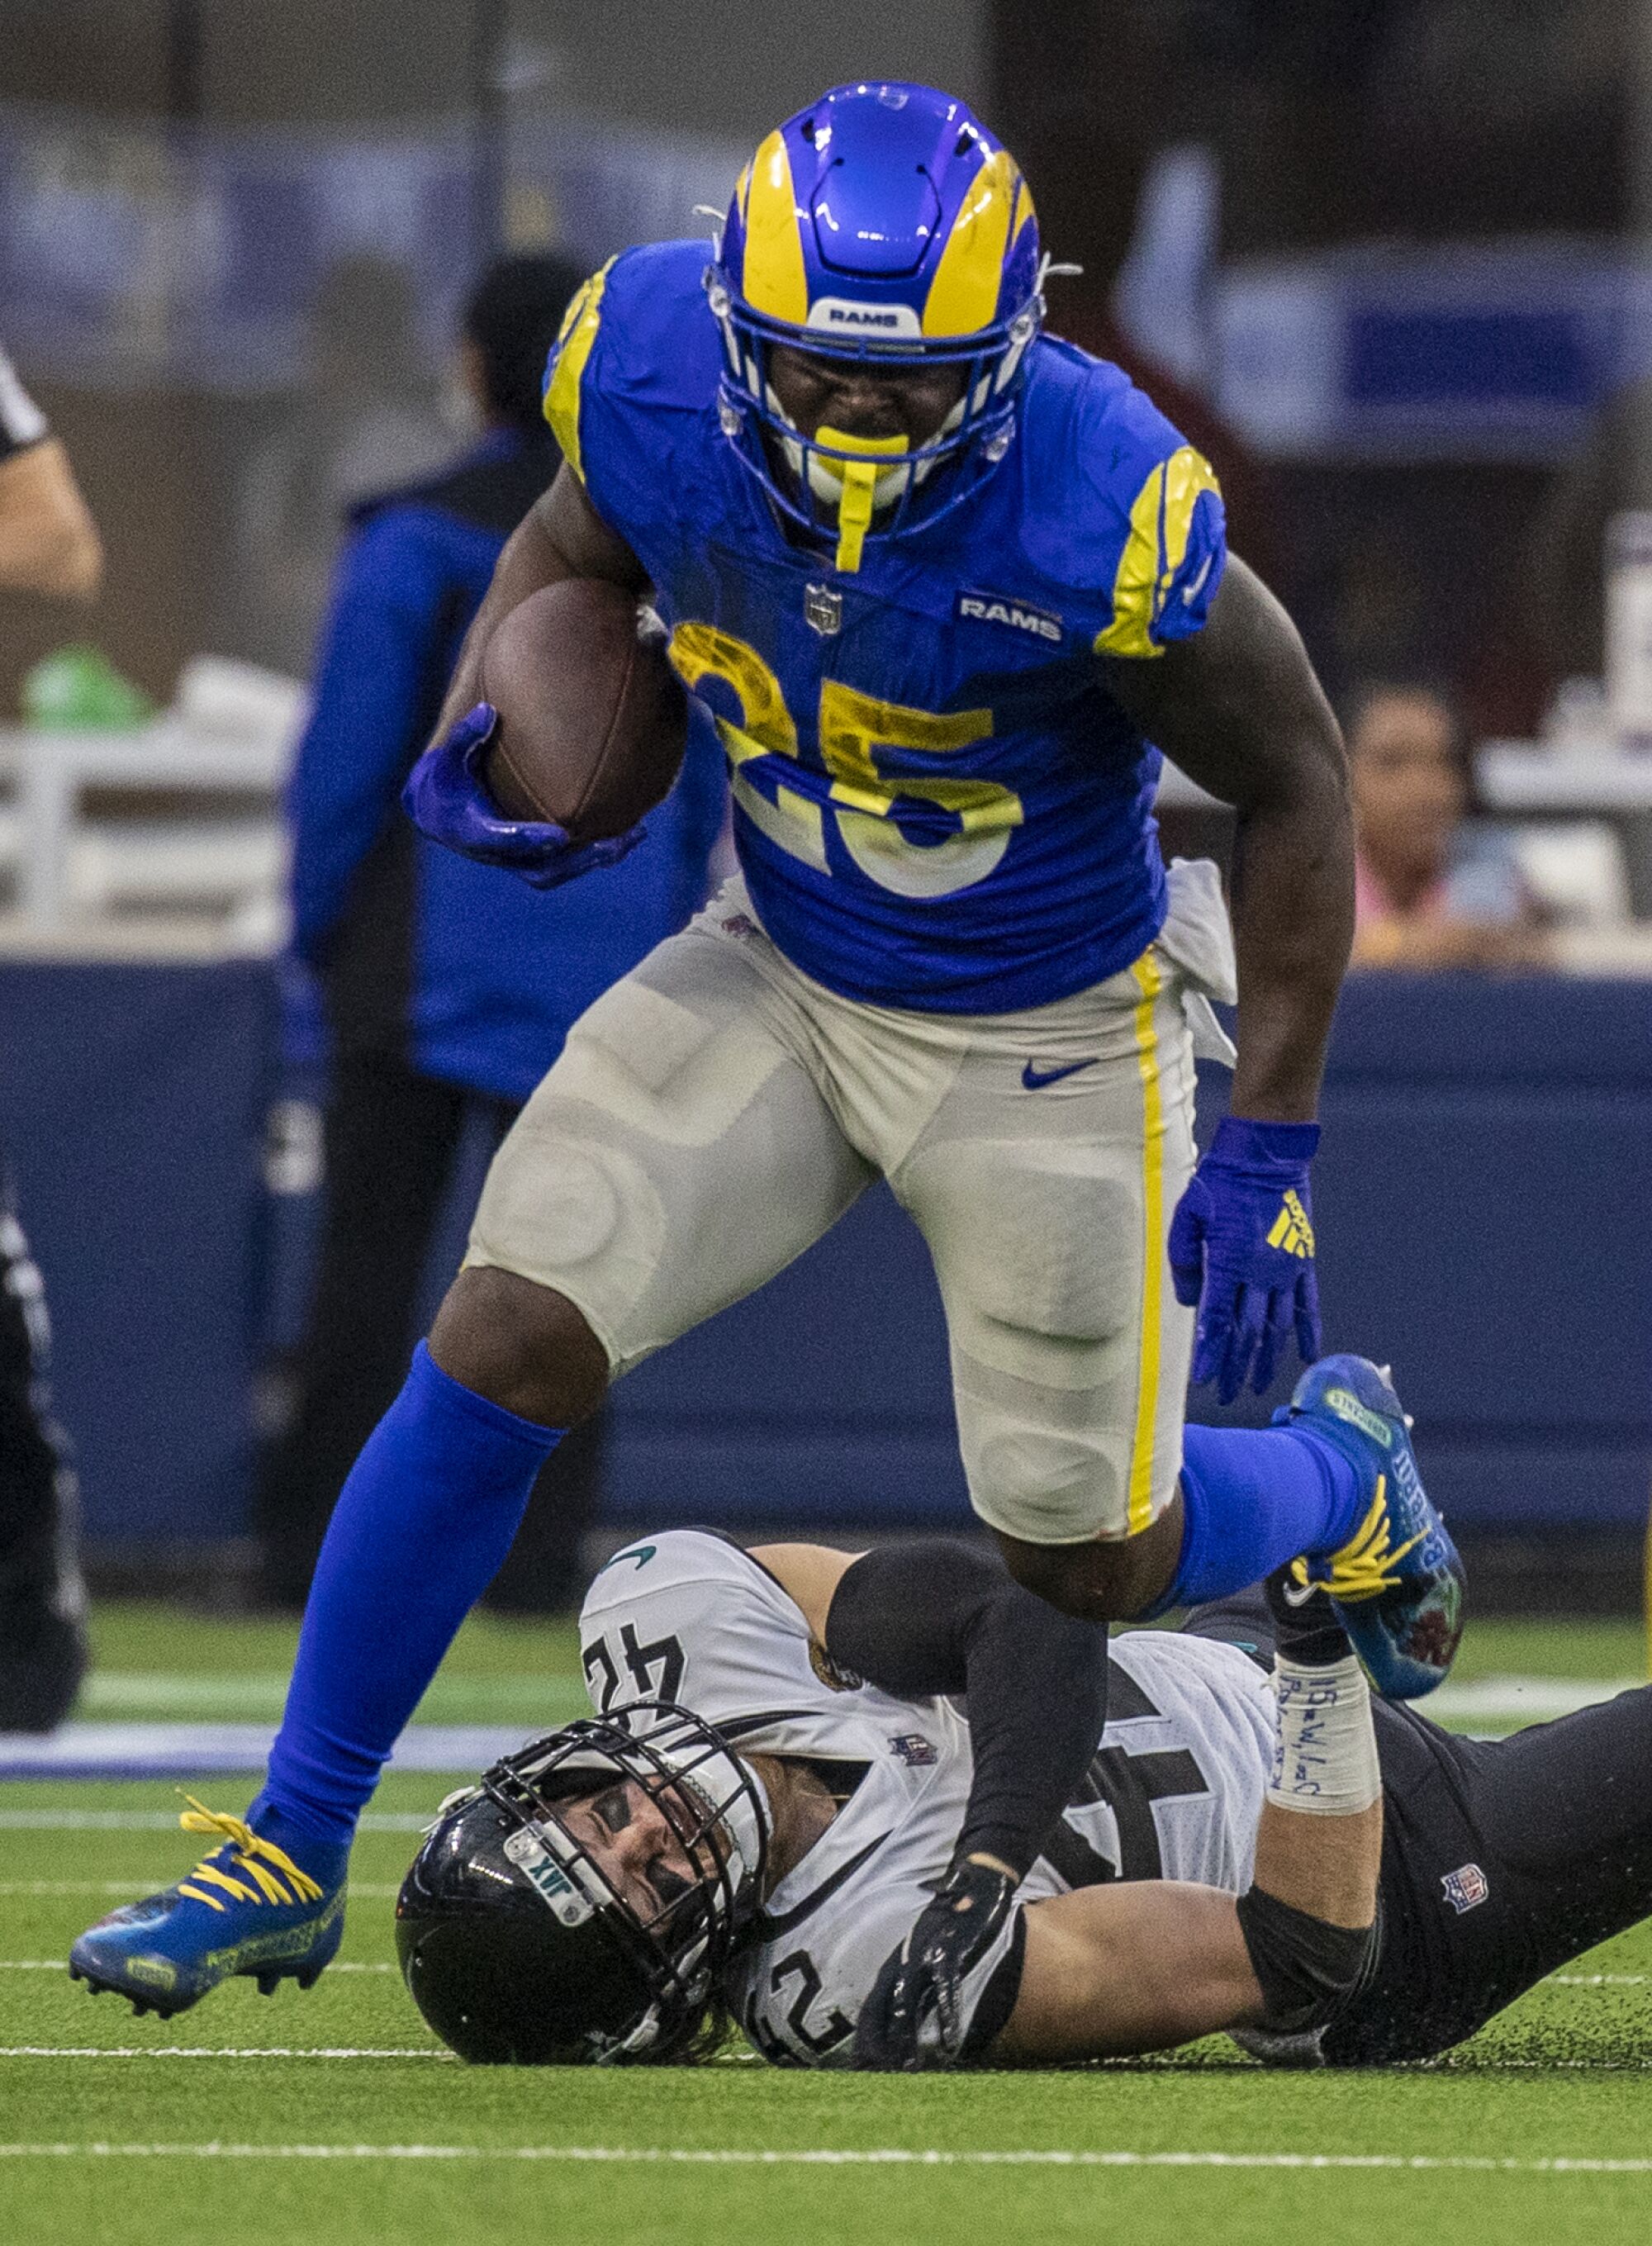 Rams running back Sony Michel, top, breaks a tackle by Jacksonville Jaguars safety Andrew Wingard.